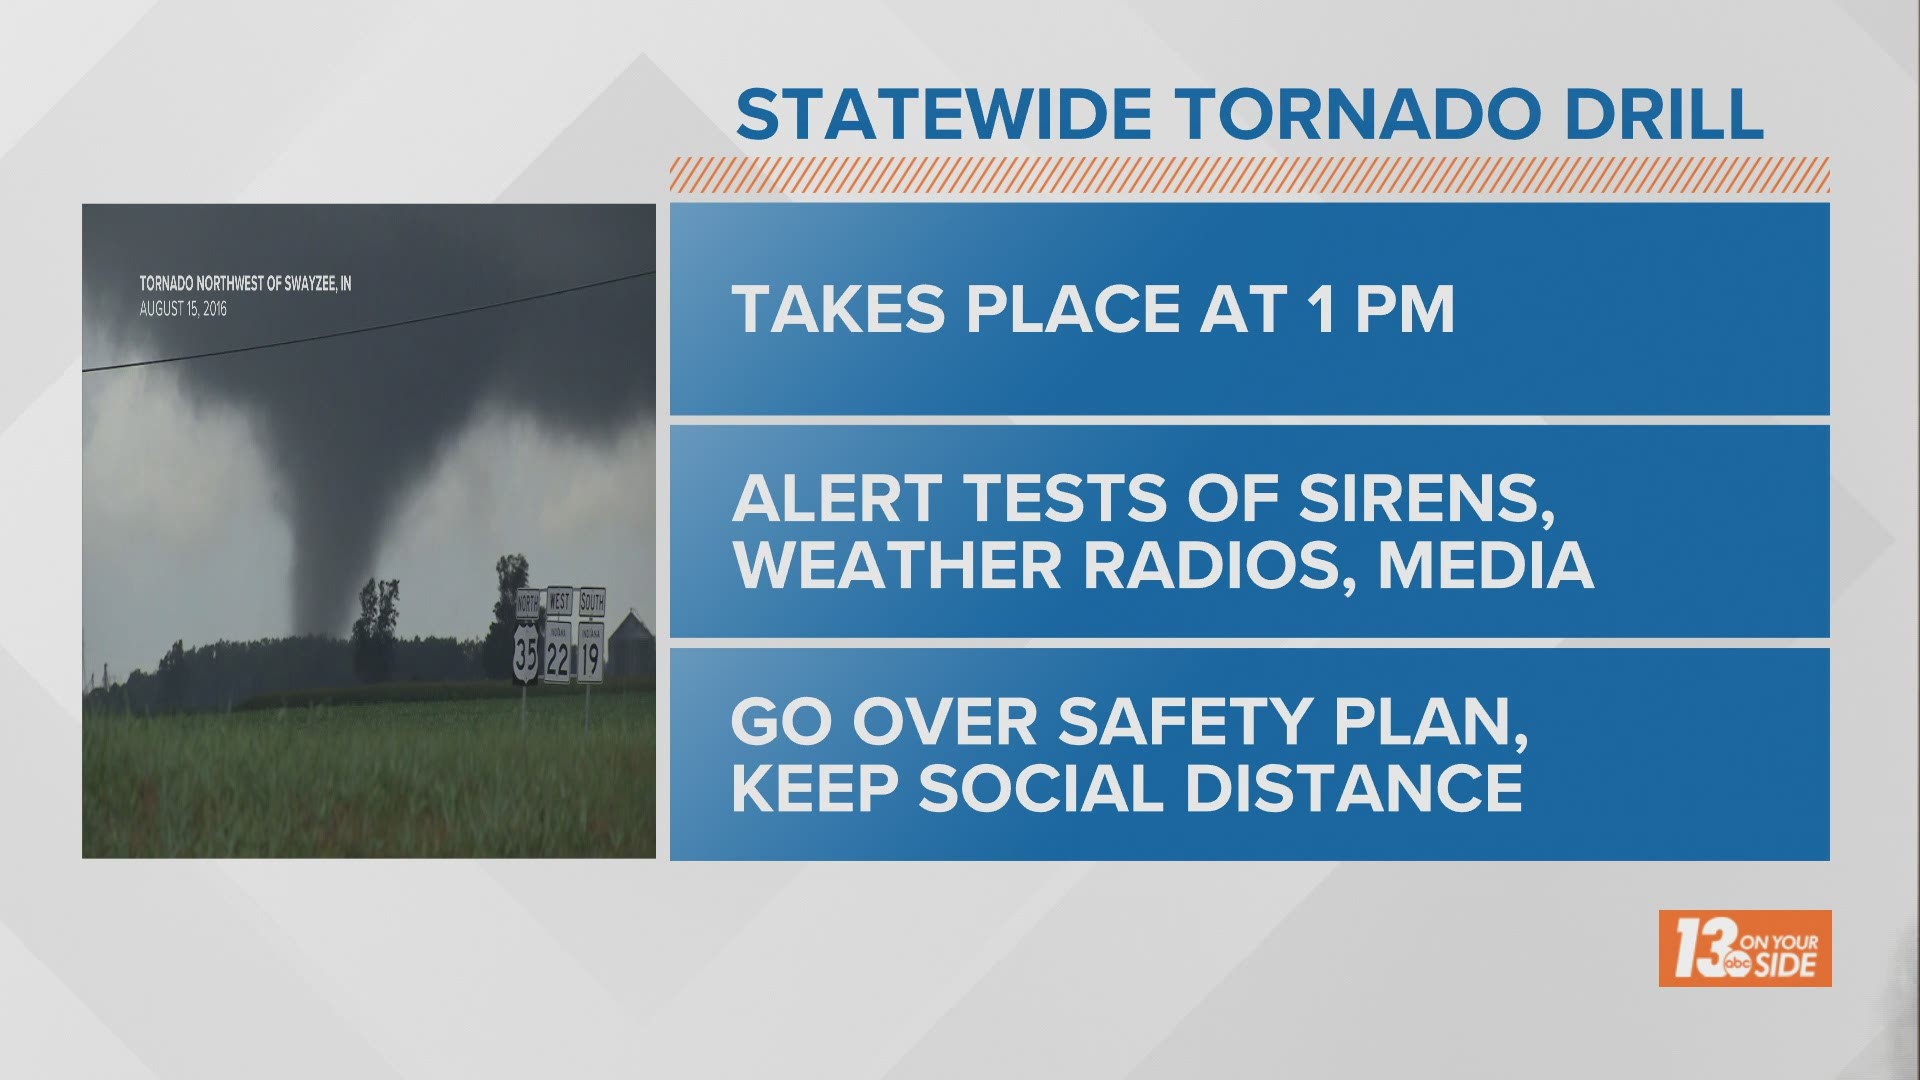 Statewide tornado drill at 1 p.m. Wednesday